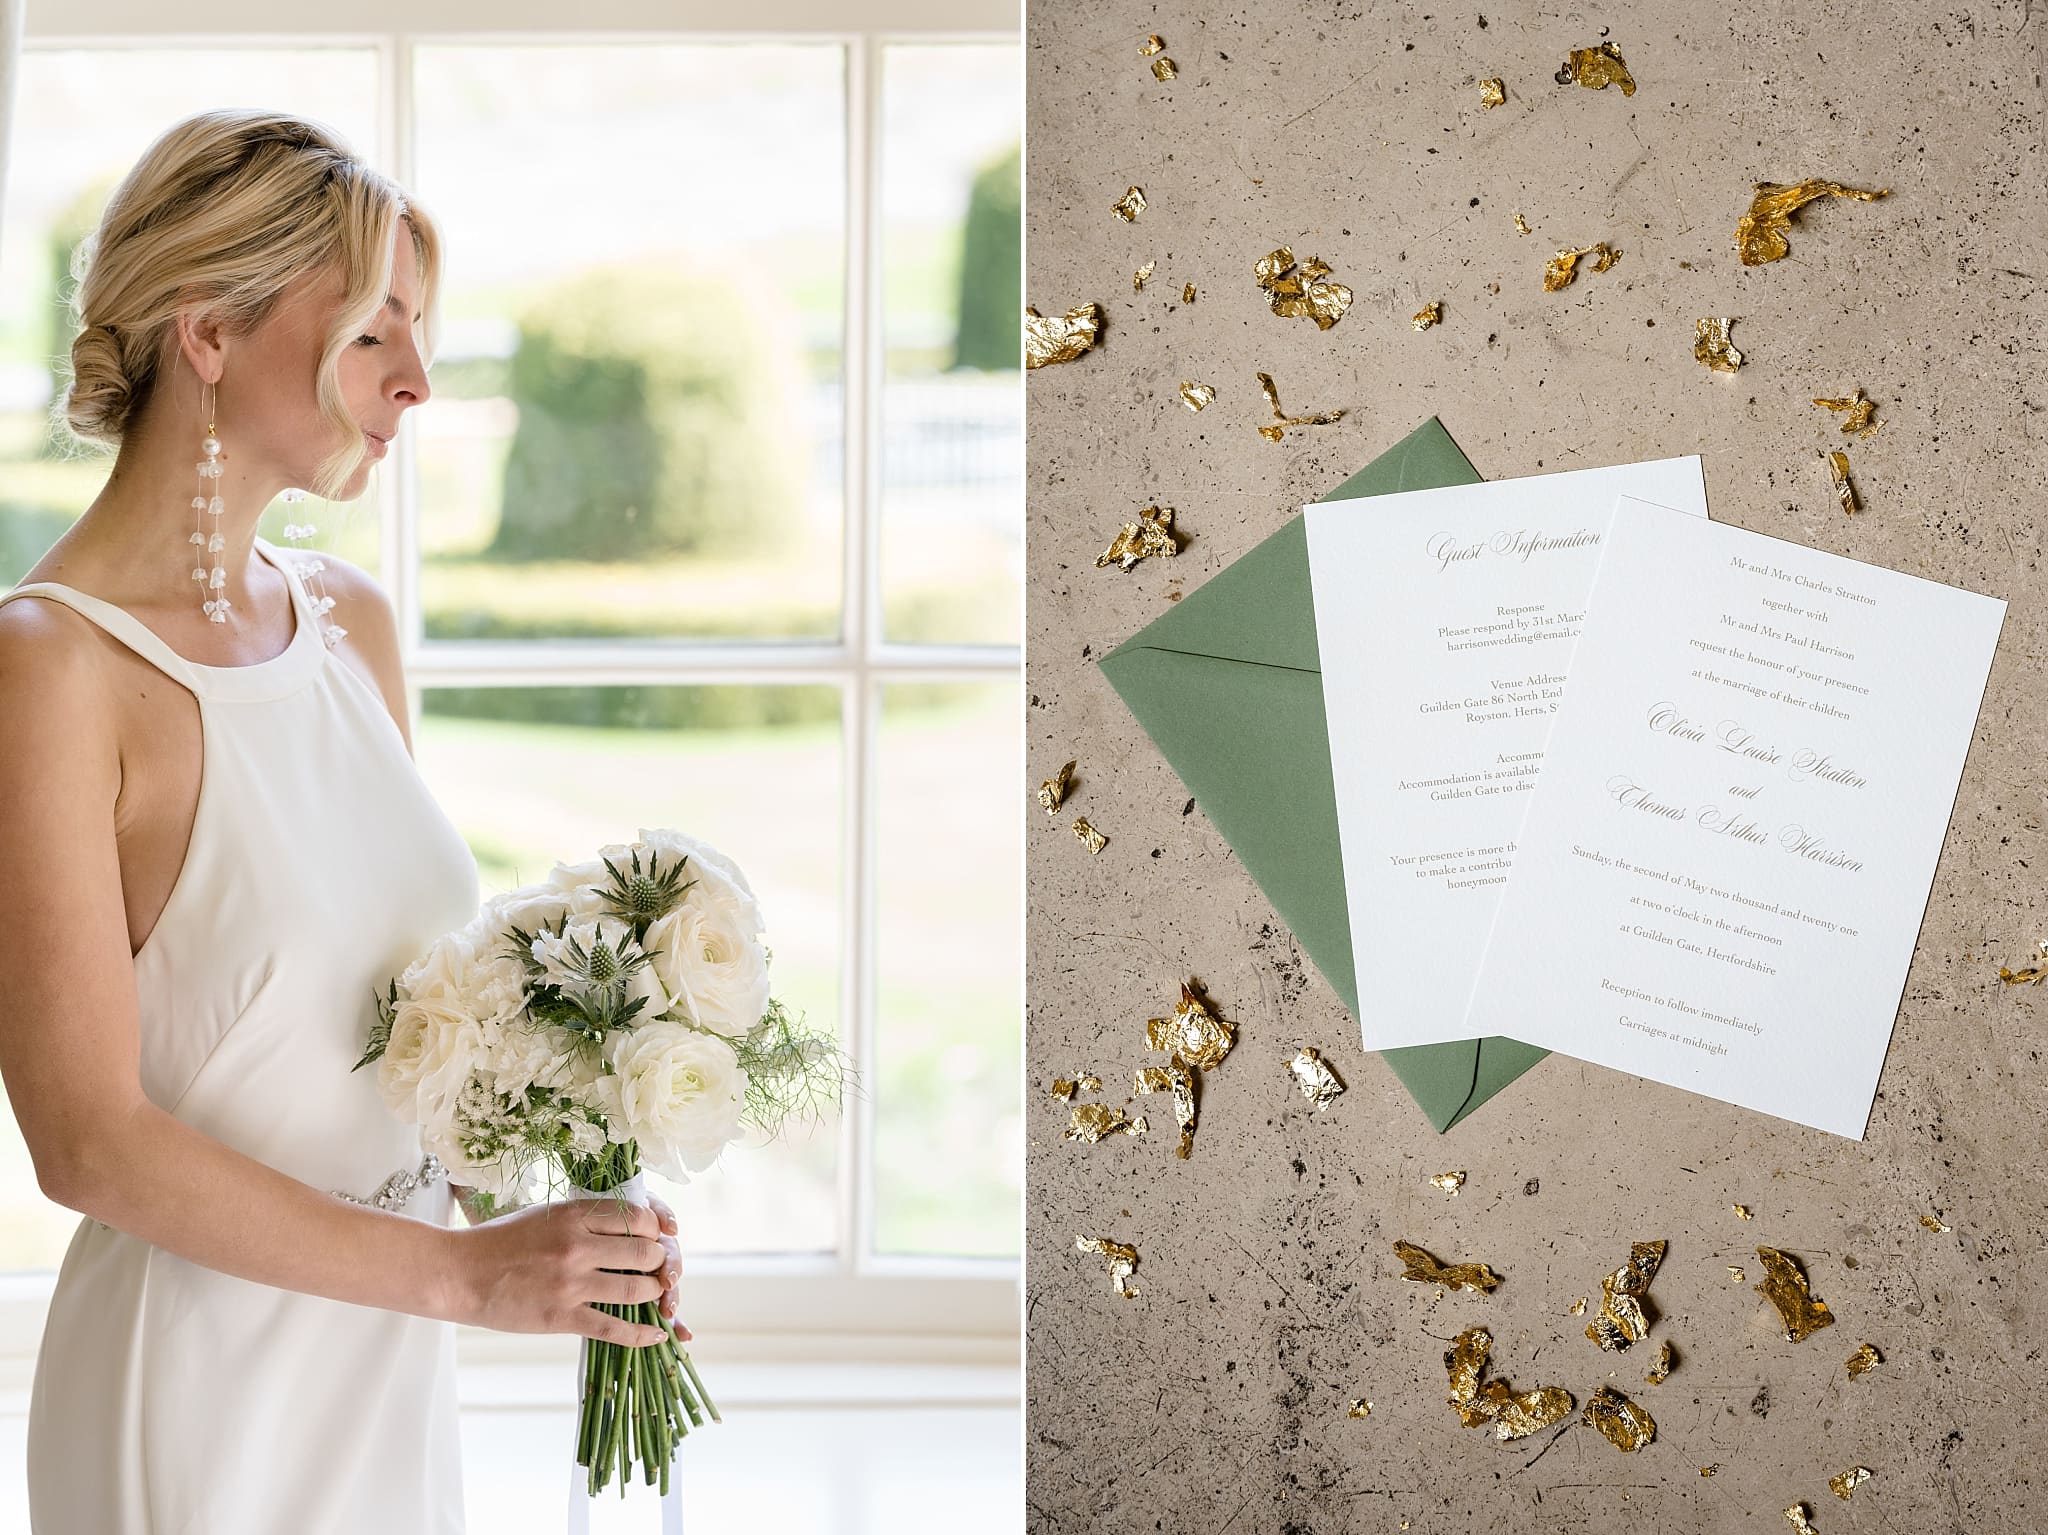 Simple green and white wedding invitation with calligraphy lettering photographed on a stone floor